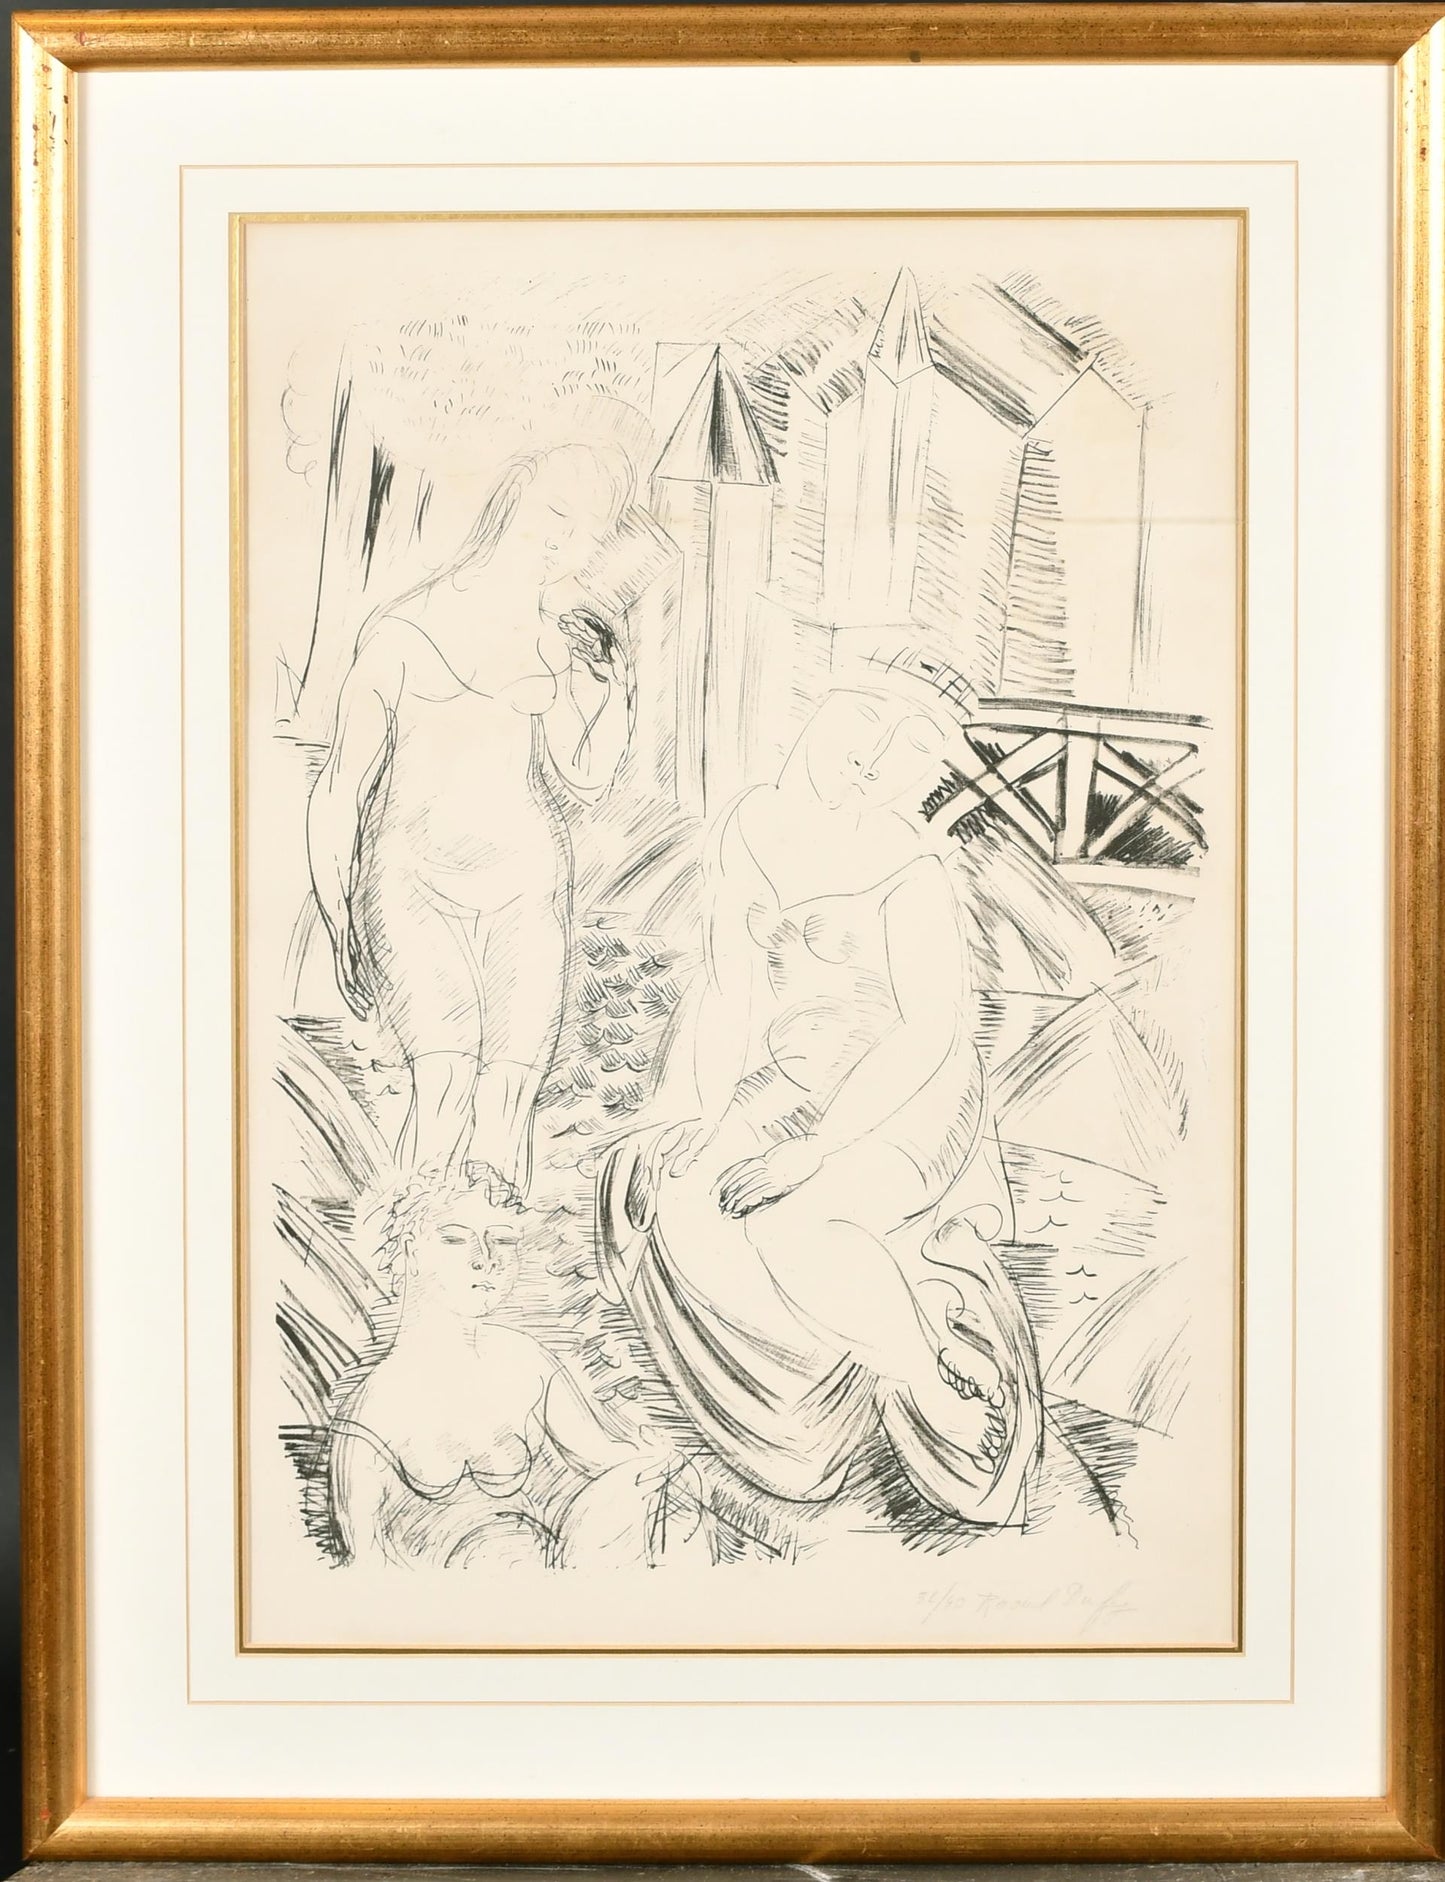 RAOUL DUFY 1877-1953 SIGNED AND NUMBERED LITHO "BATHERS" 1925